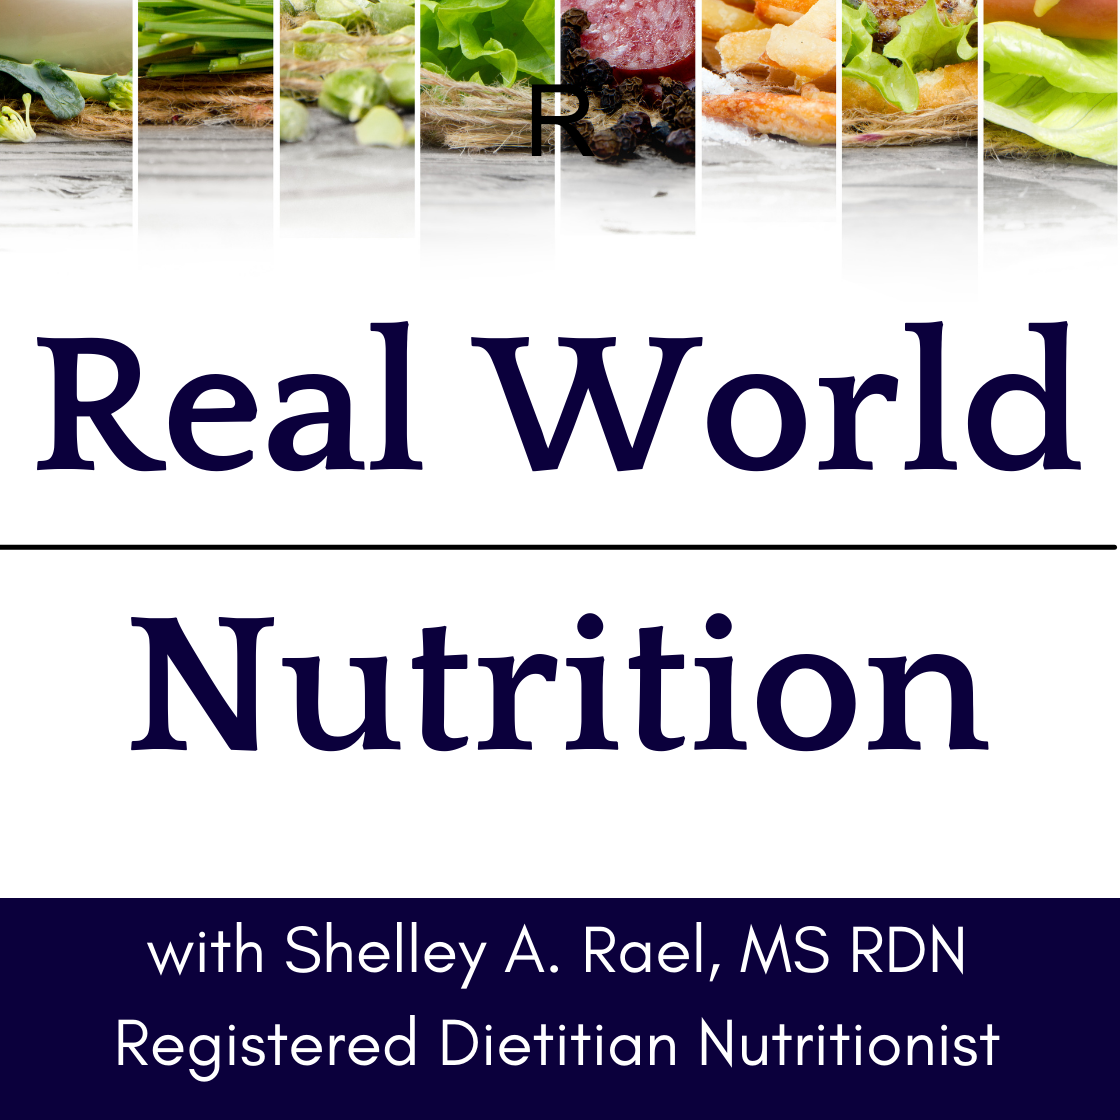 Real World Nutrition